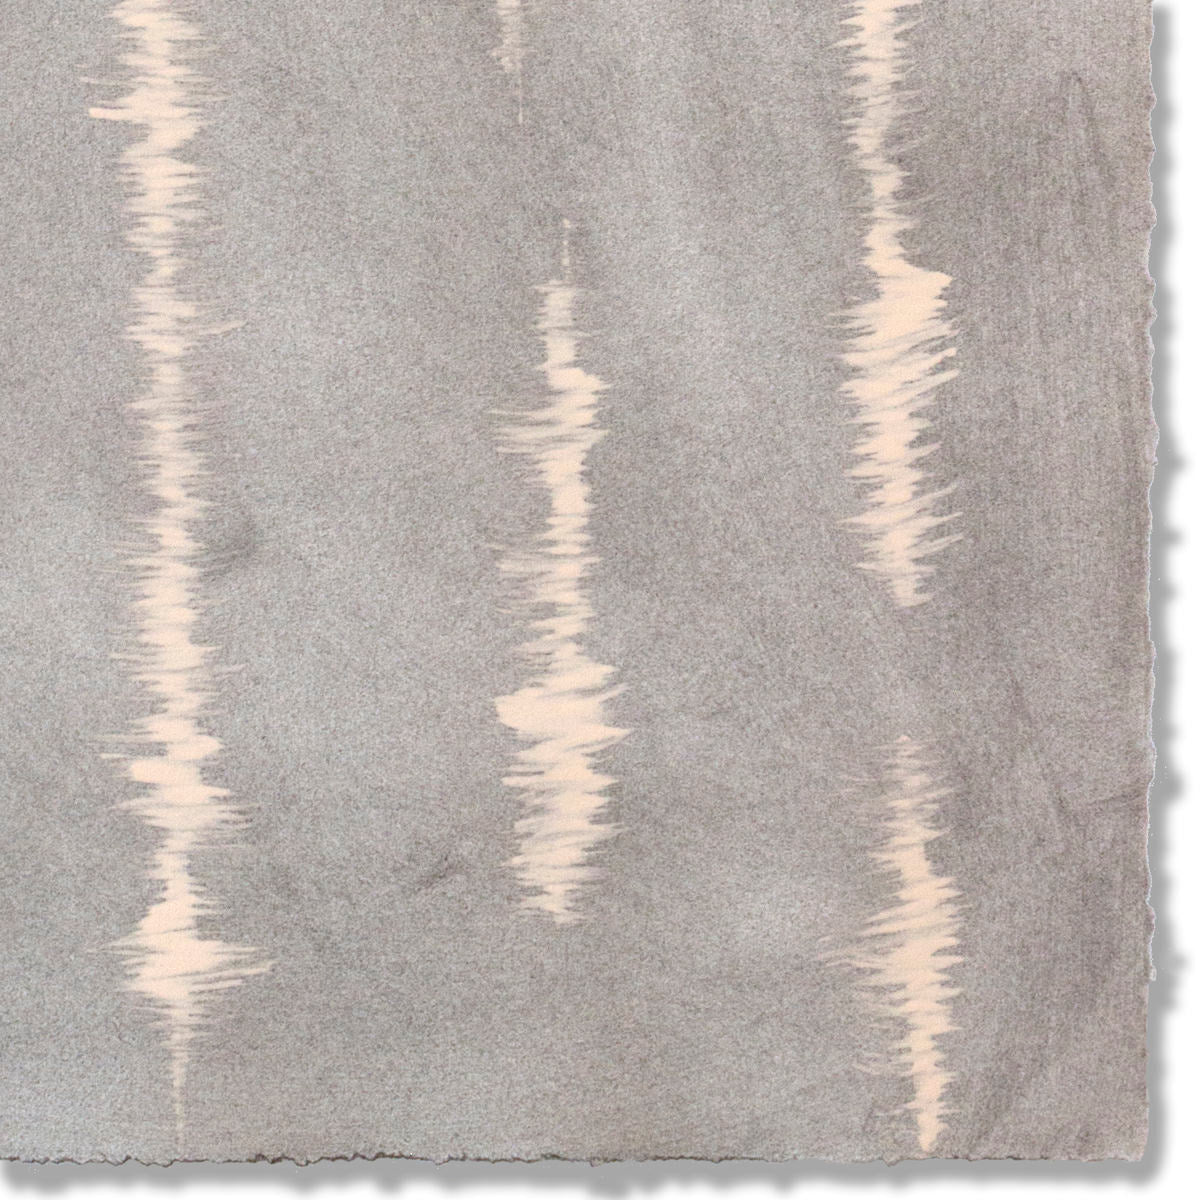 Detail of a hand-painted wallpaper swatch with an irregular vibrating linear pattern in peach on a greige field.